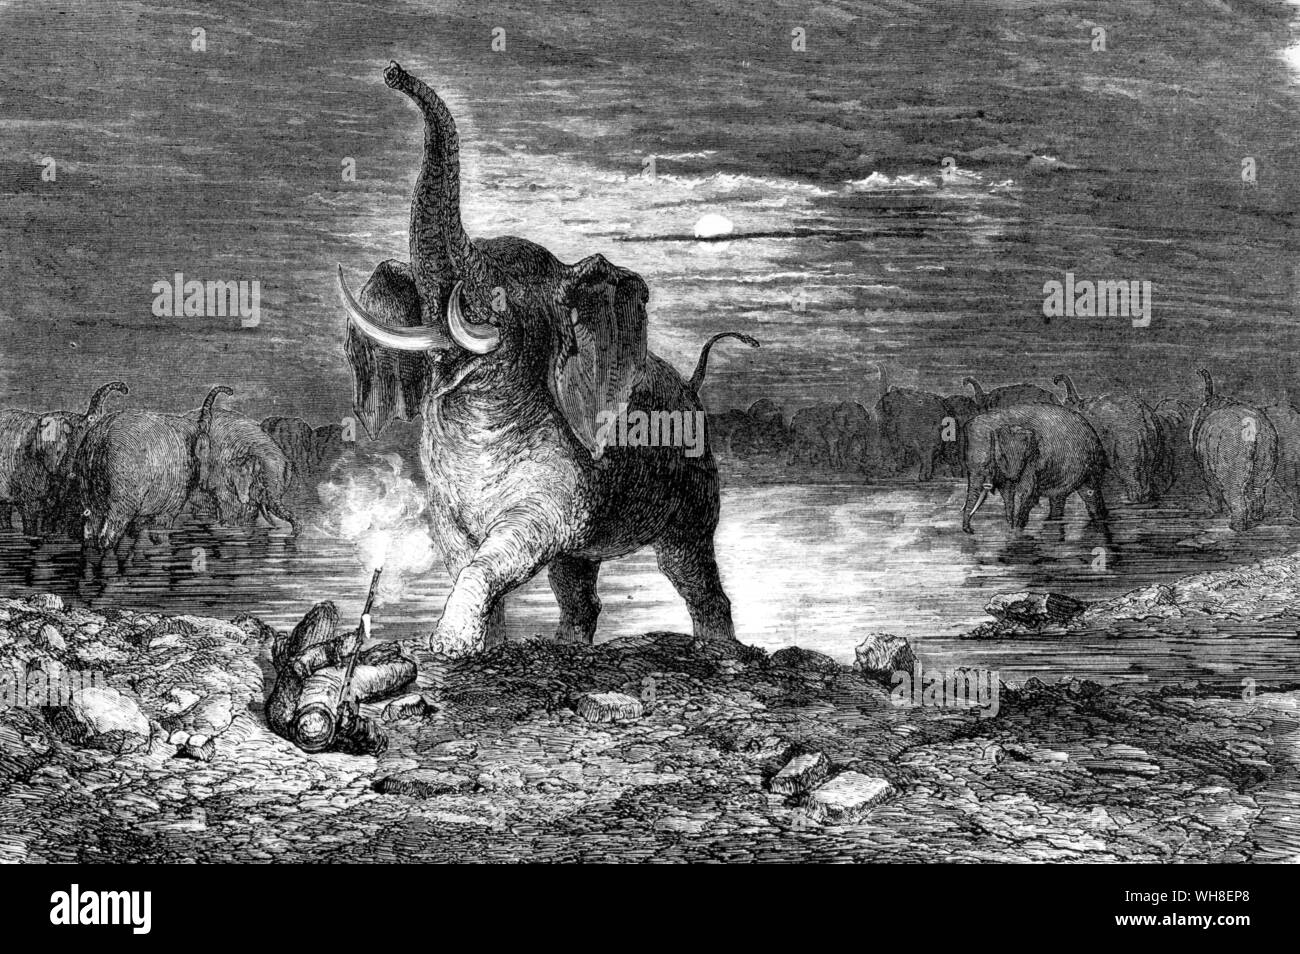 Elephant Hunter attacked by elephants from All Round The World 1868. The African Adventure, A History of Africa's Explorers by Timothy Severin, page 20. Stock Photo